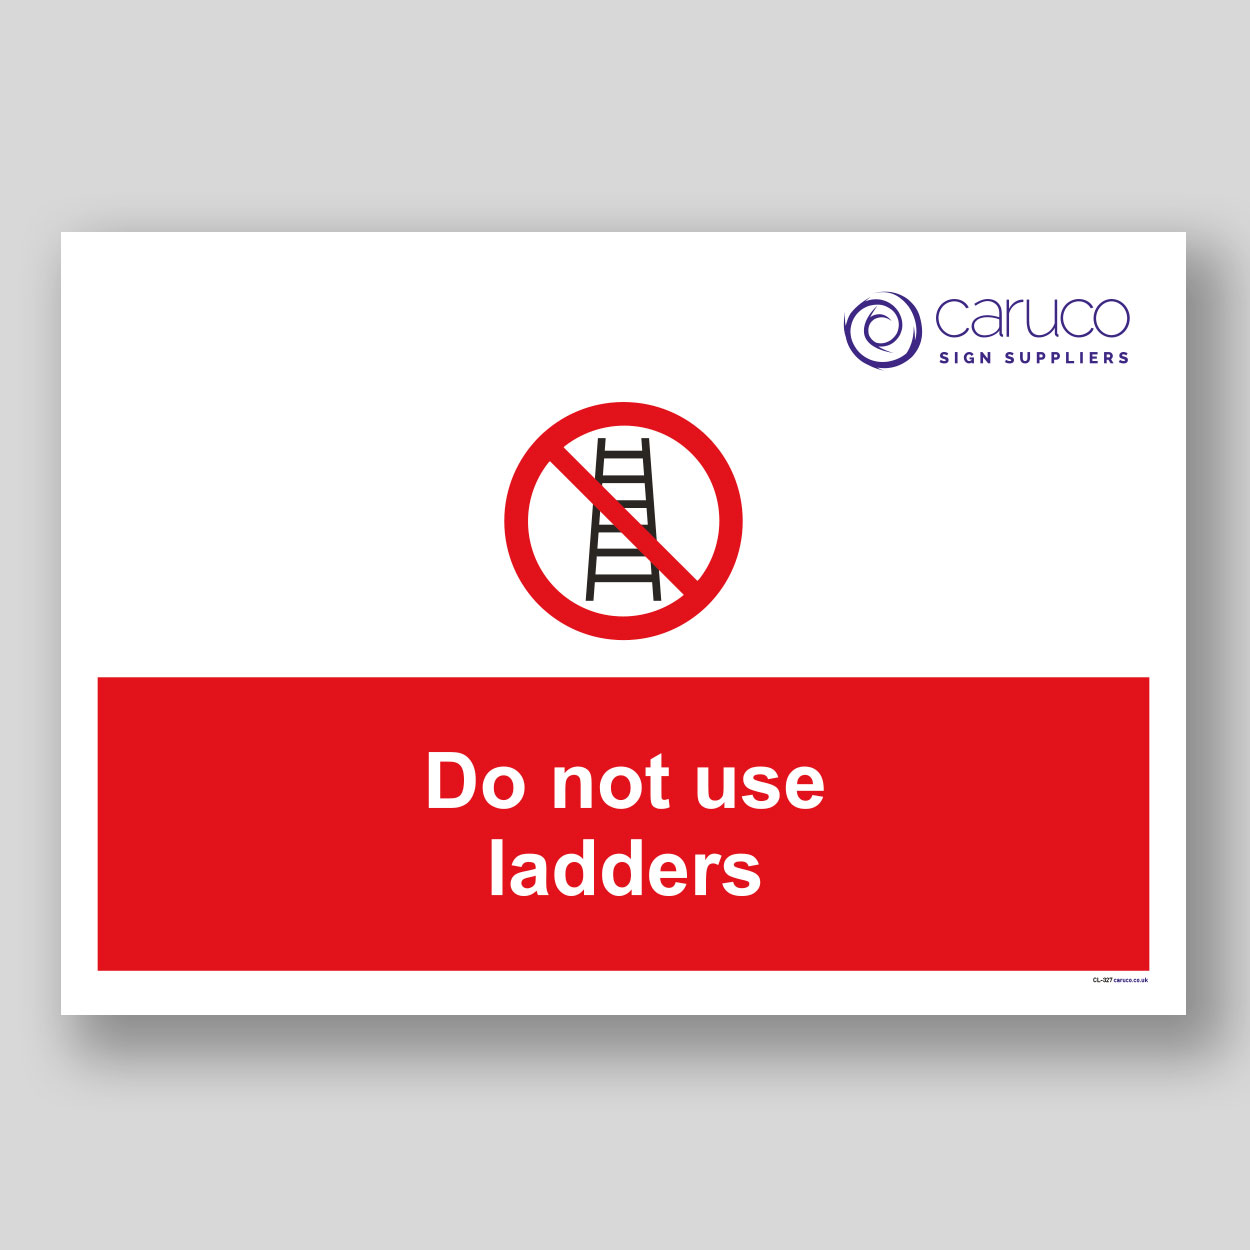 CL-327 Do not use ladders